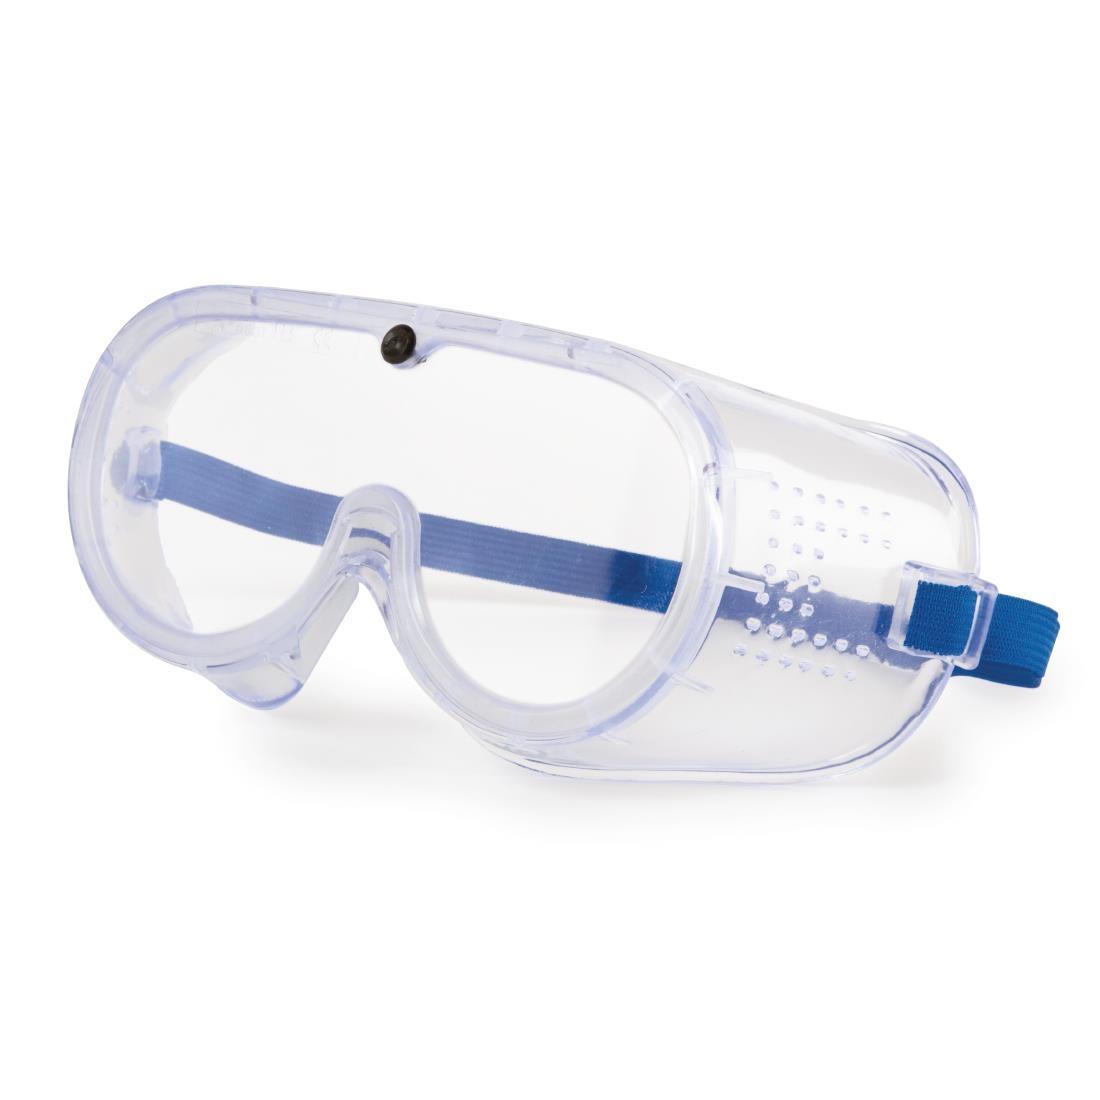 Safety Goggles - GK869  - 1